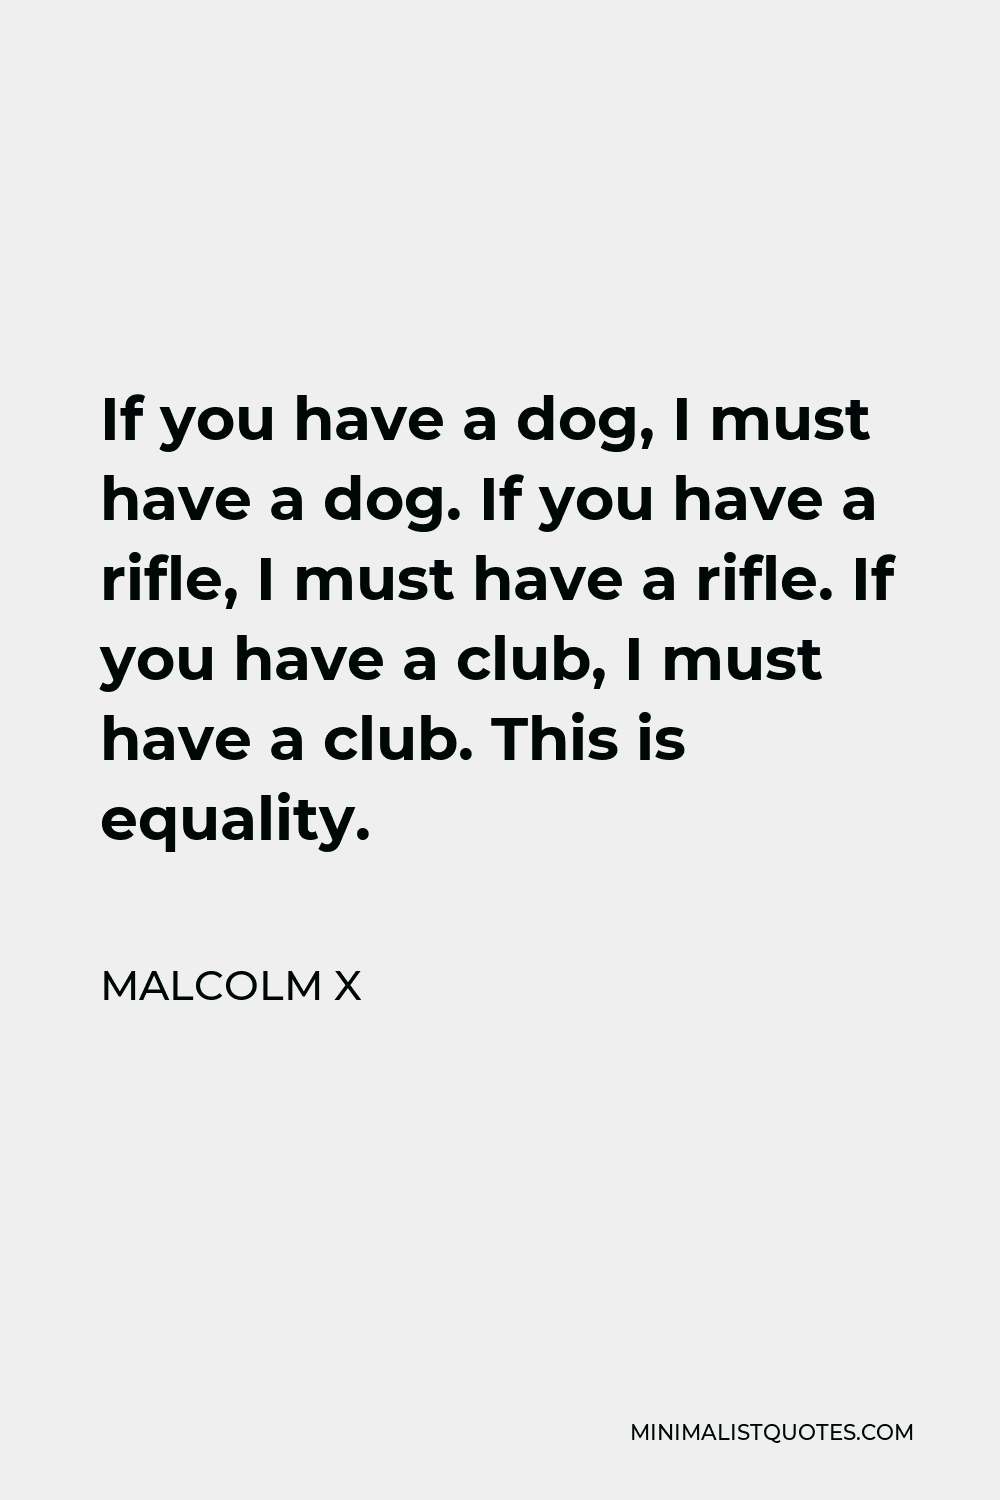 Malcolm X Quote - If you have a dog, I must have a dog. If you have a rifle, I must have a rifle. If you have a club, I must have a club. This is equality.